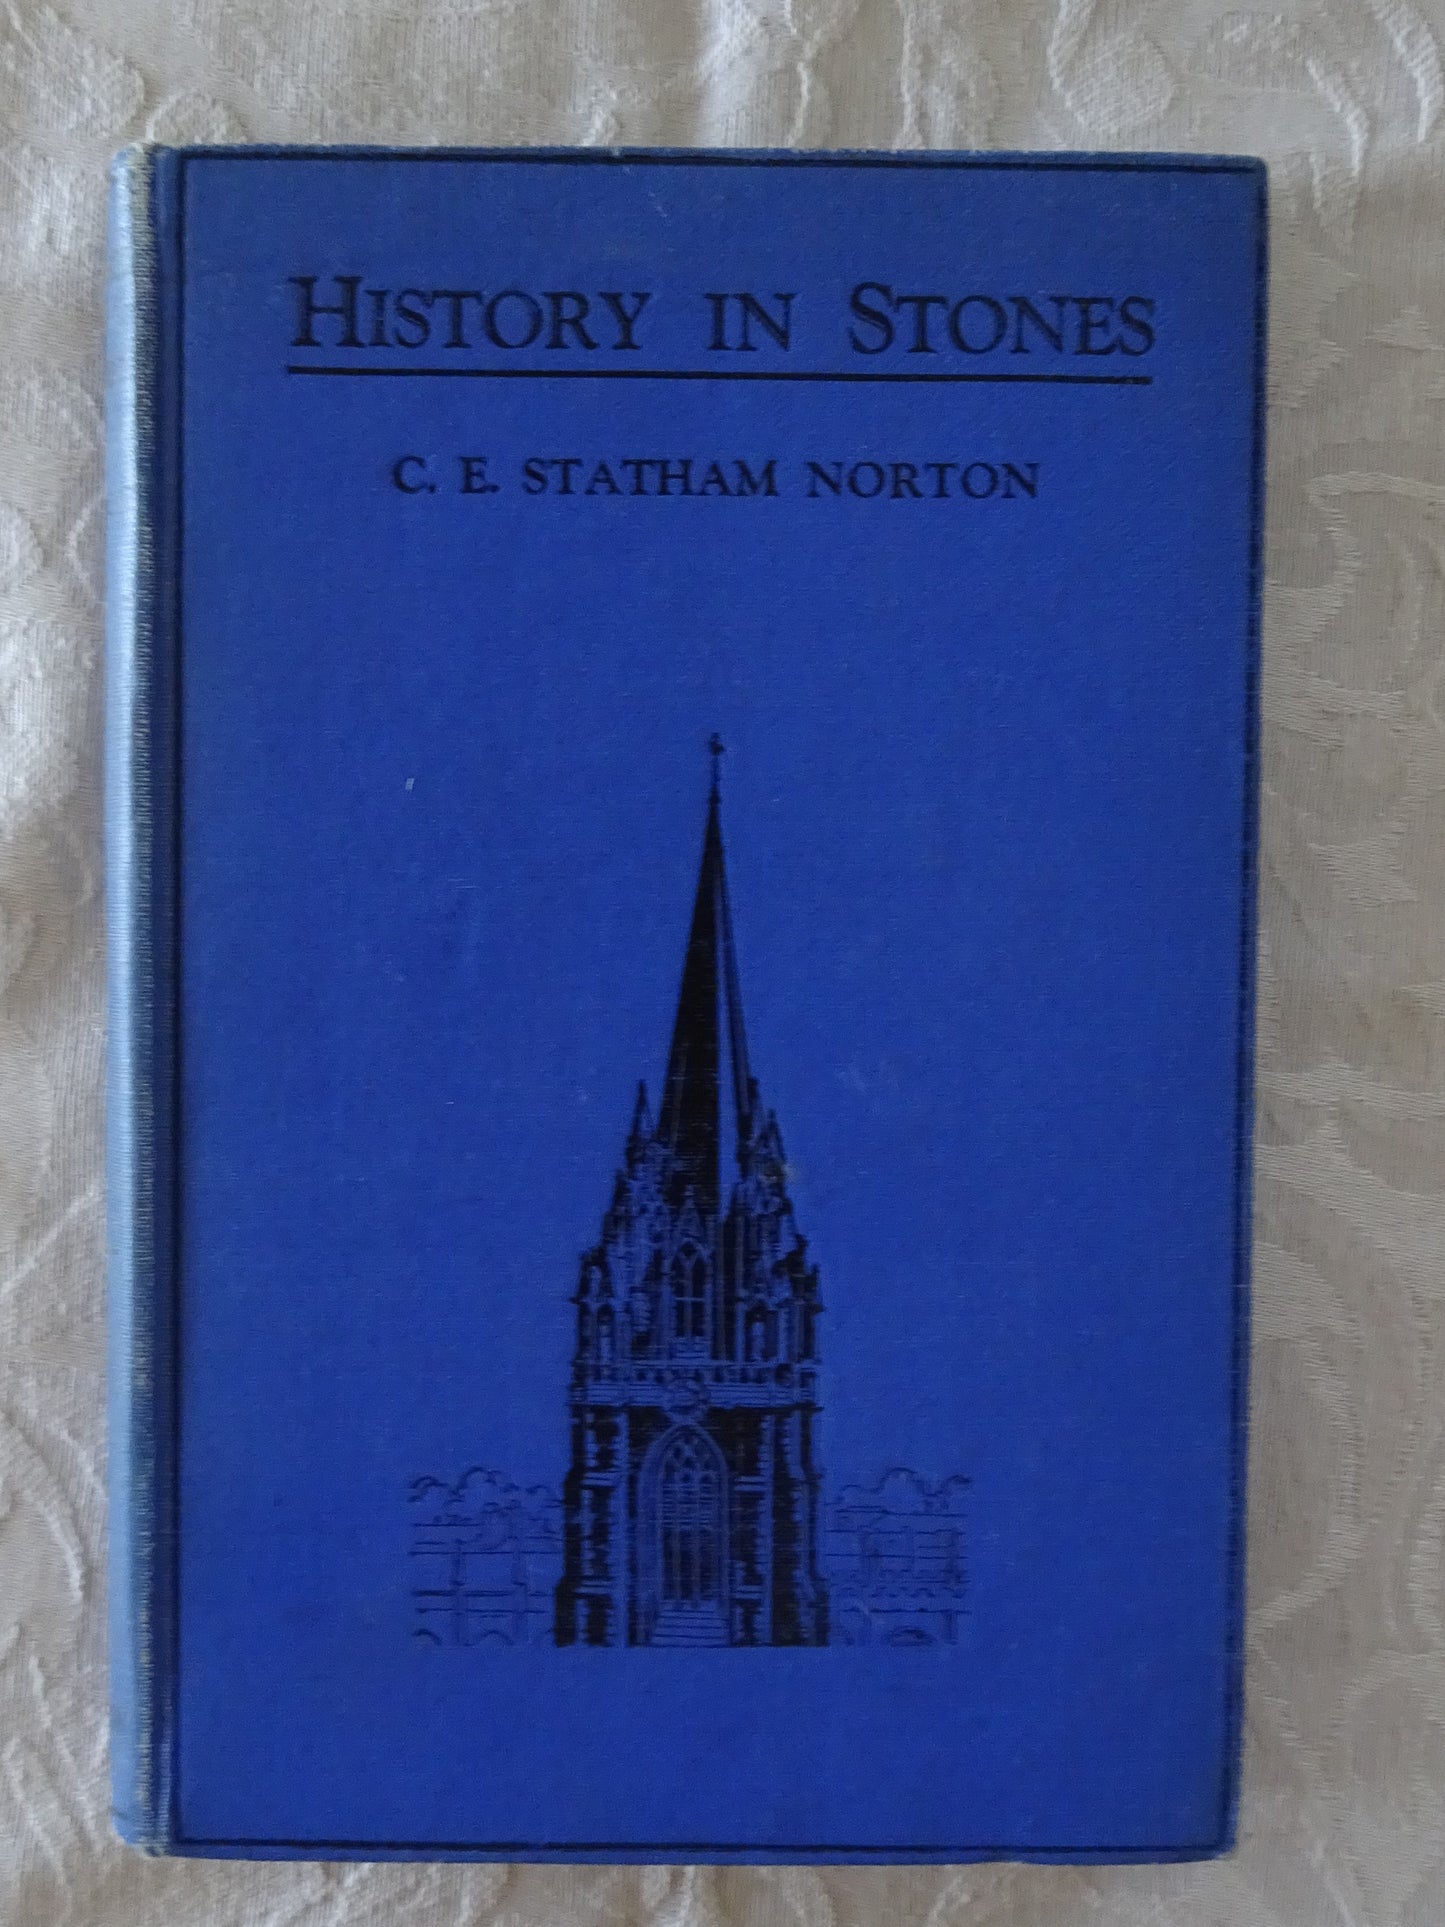 History In Stones  by C. E. Statham Norton